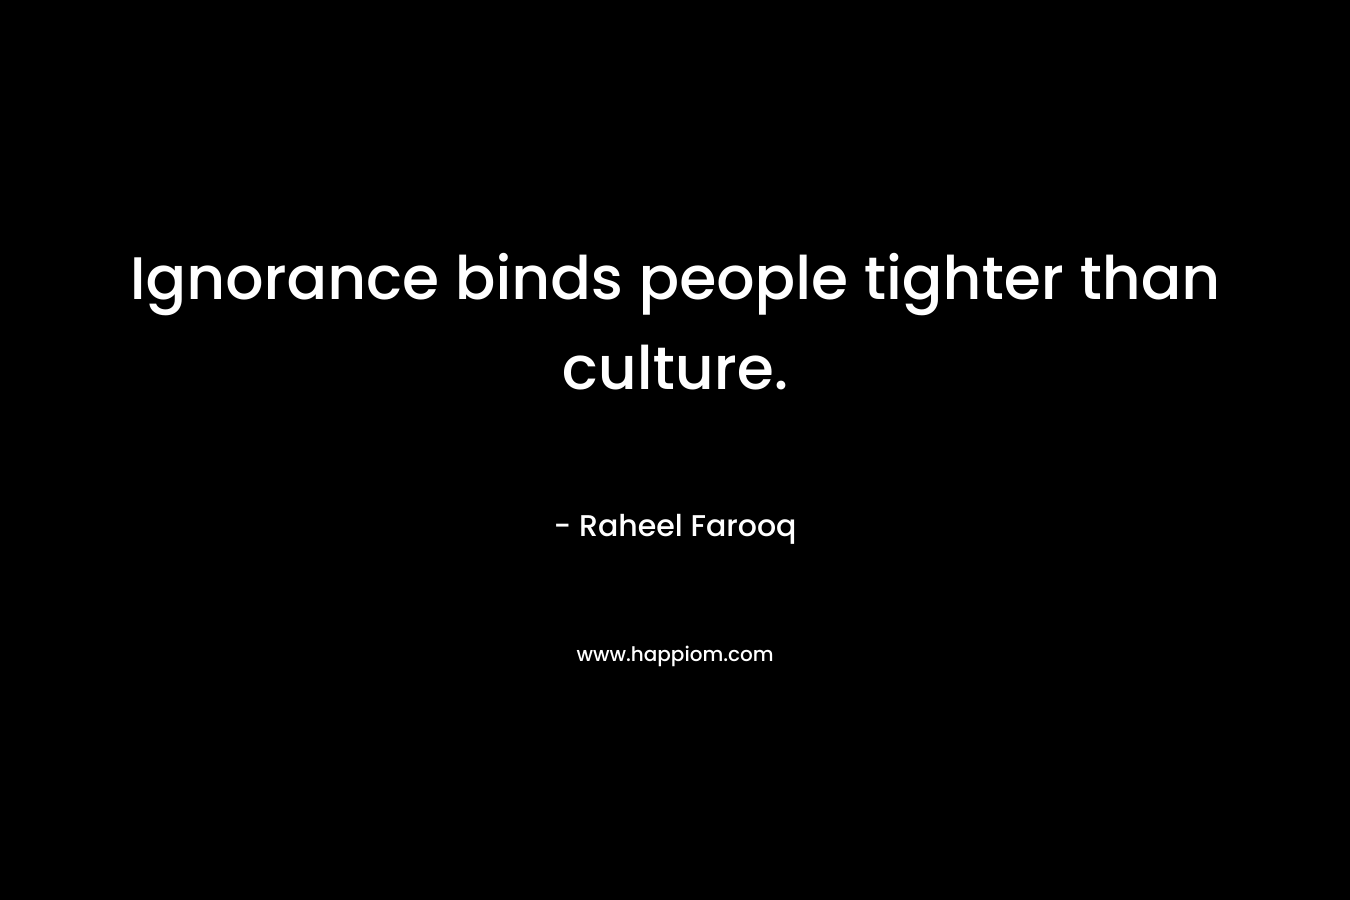 Ignorance binds people tighter than culture.